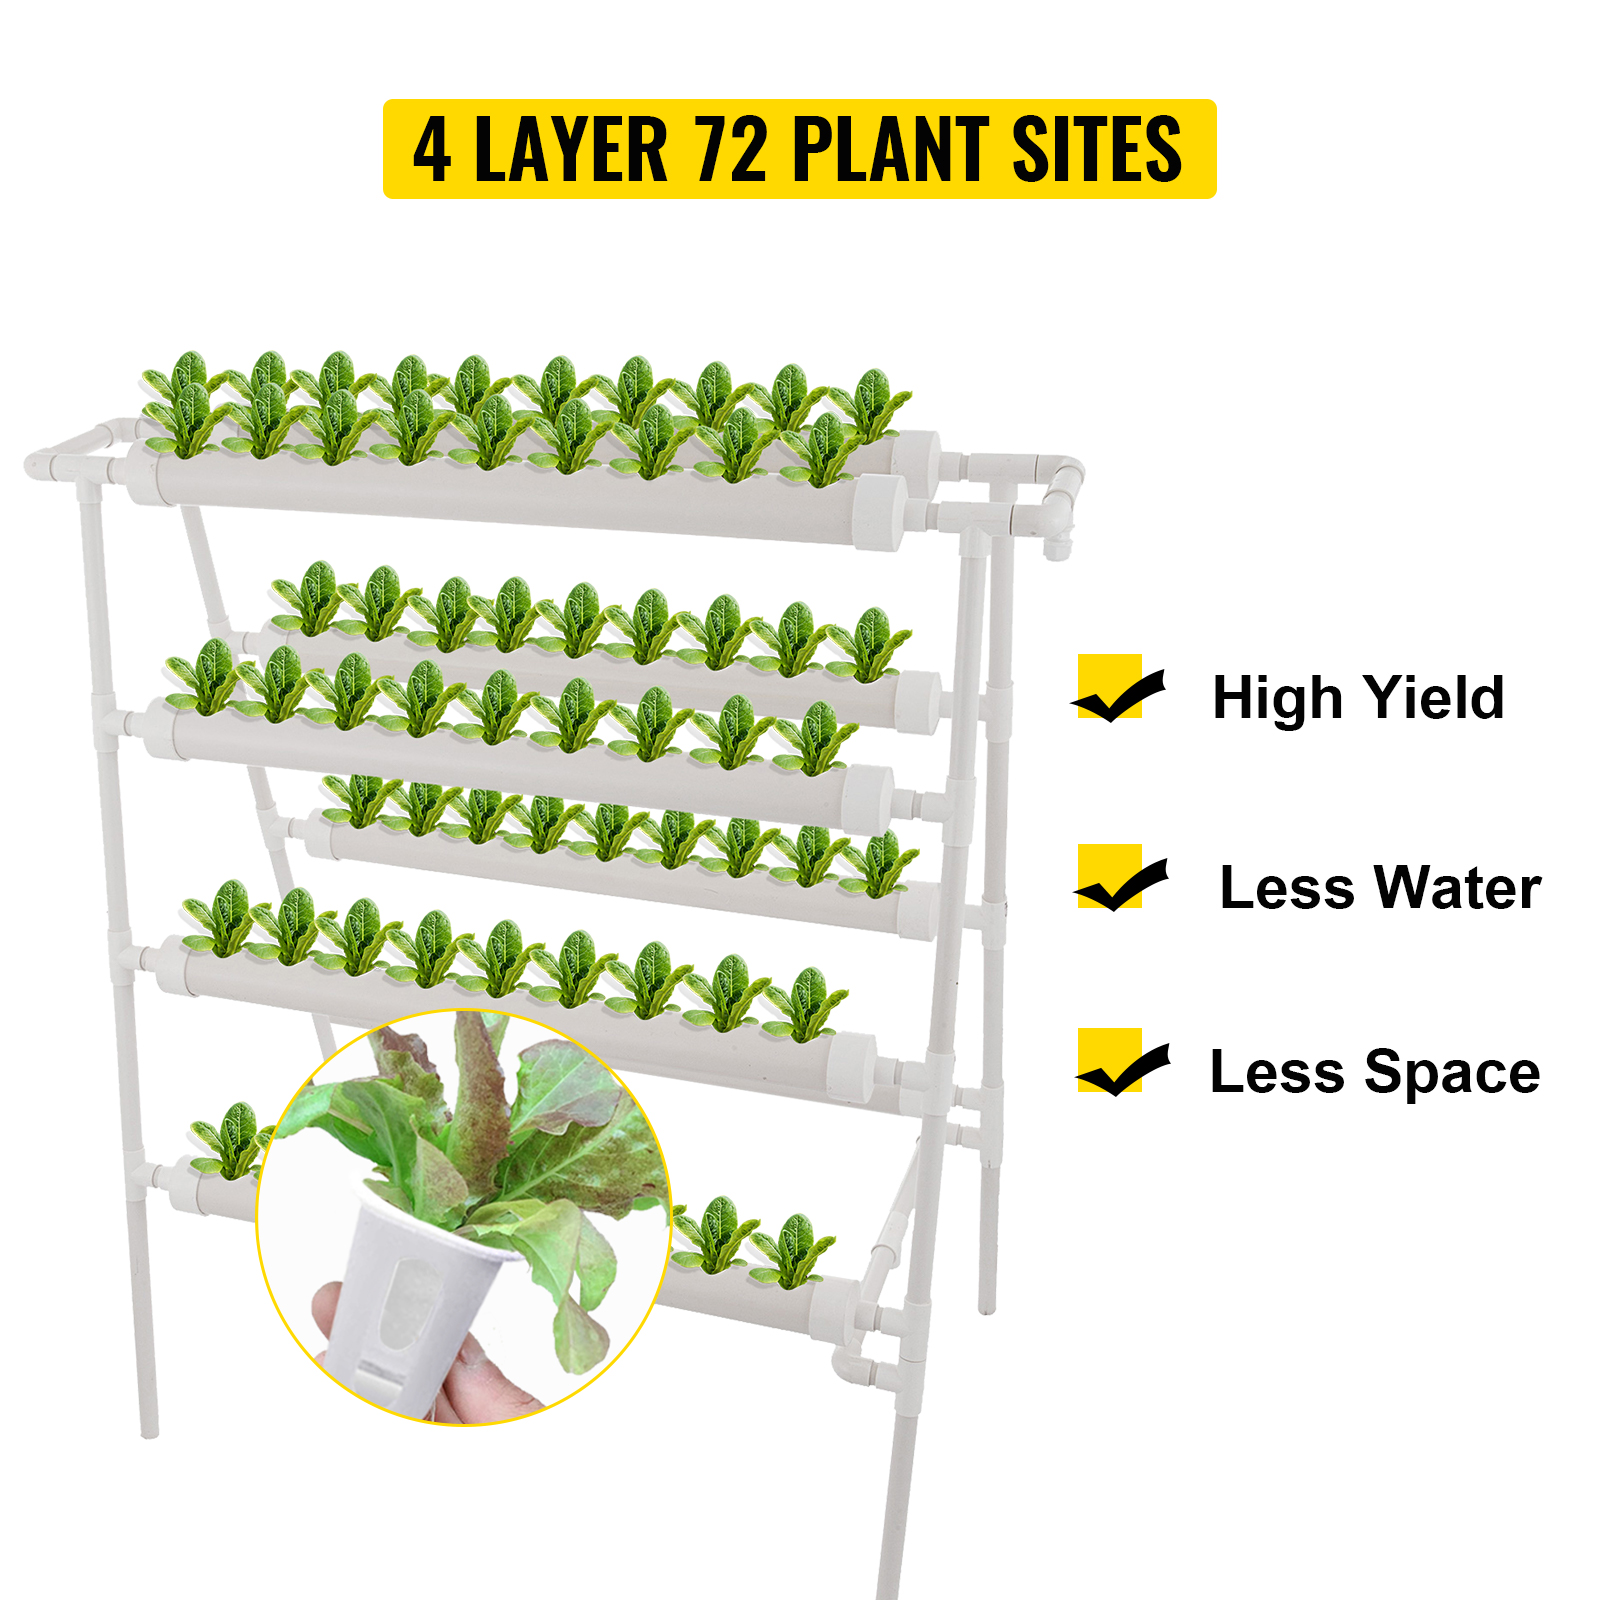 Details about   Hydroponic Site Grow Kit 84 Planting Sites Garden Plant System Vegetable Tool 